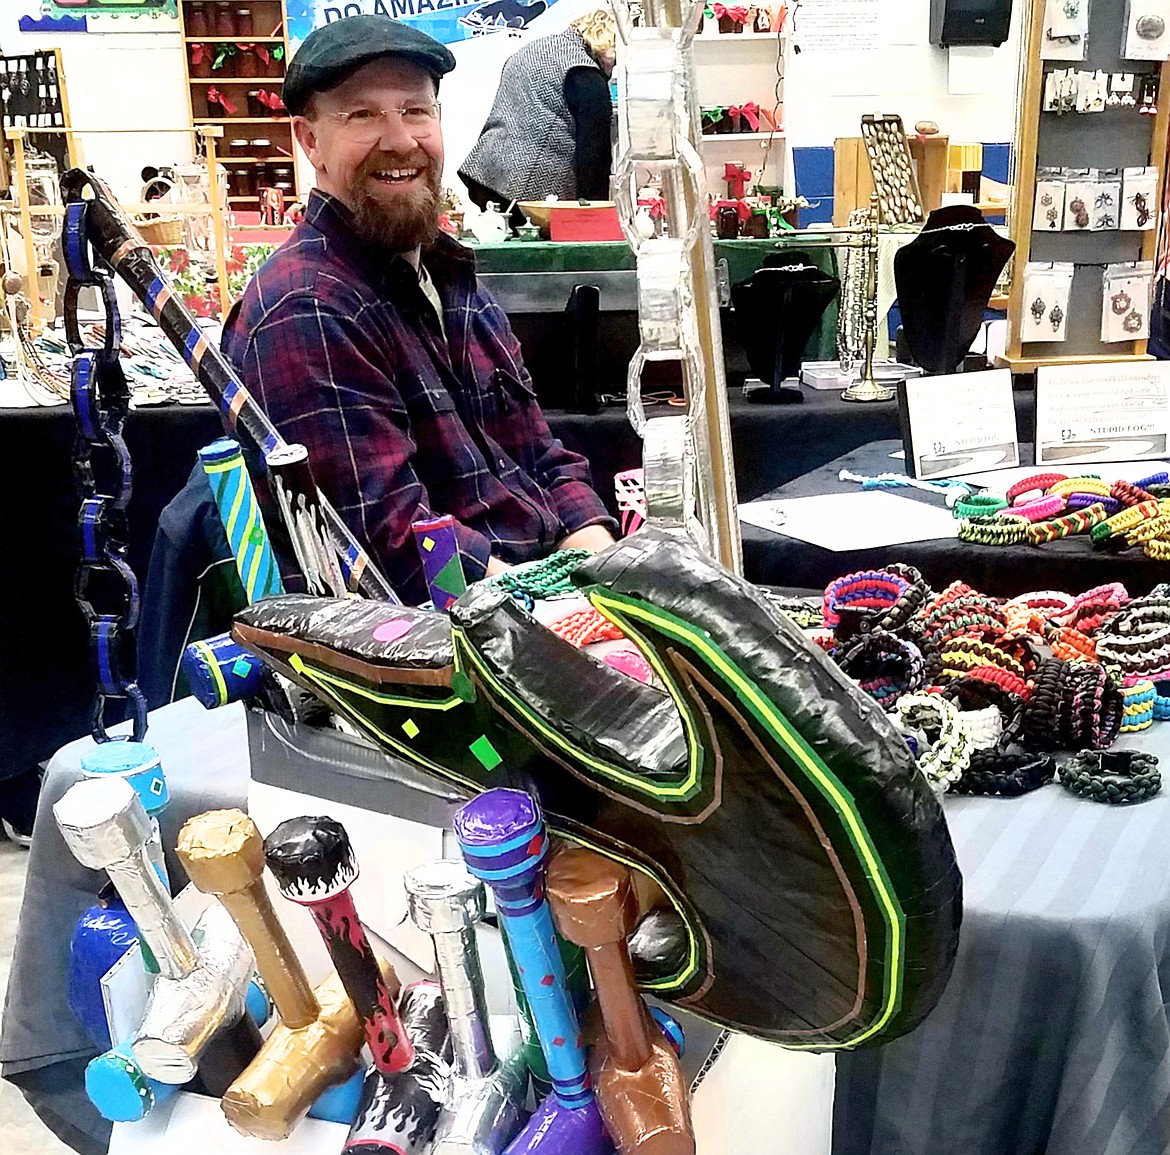 Jim Lochard mans the duct tape weaponry and paracord bracelet table at the market.